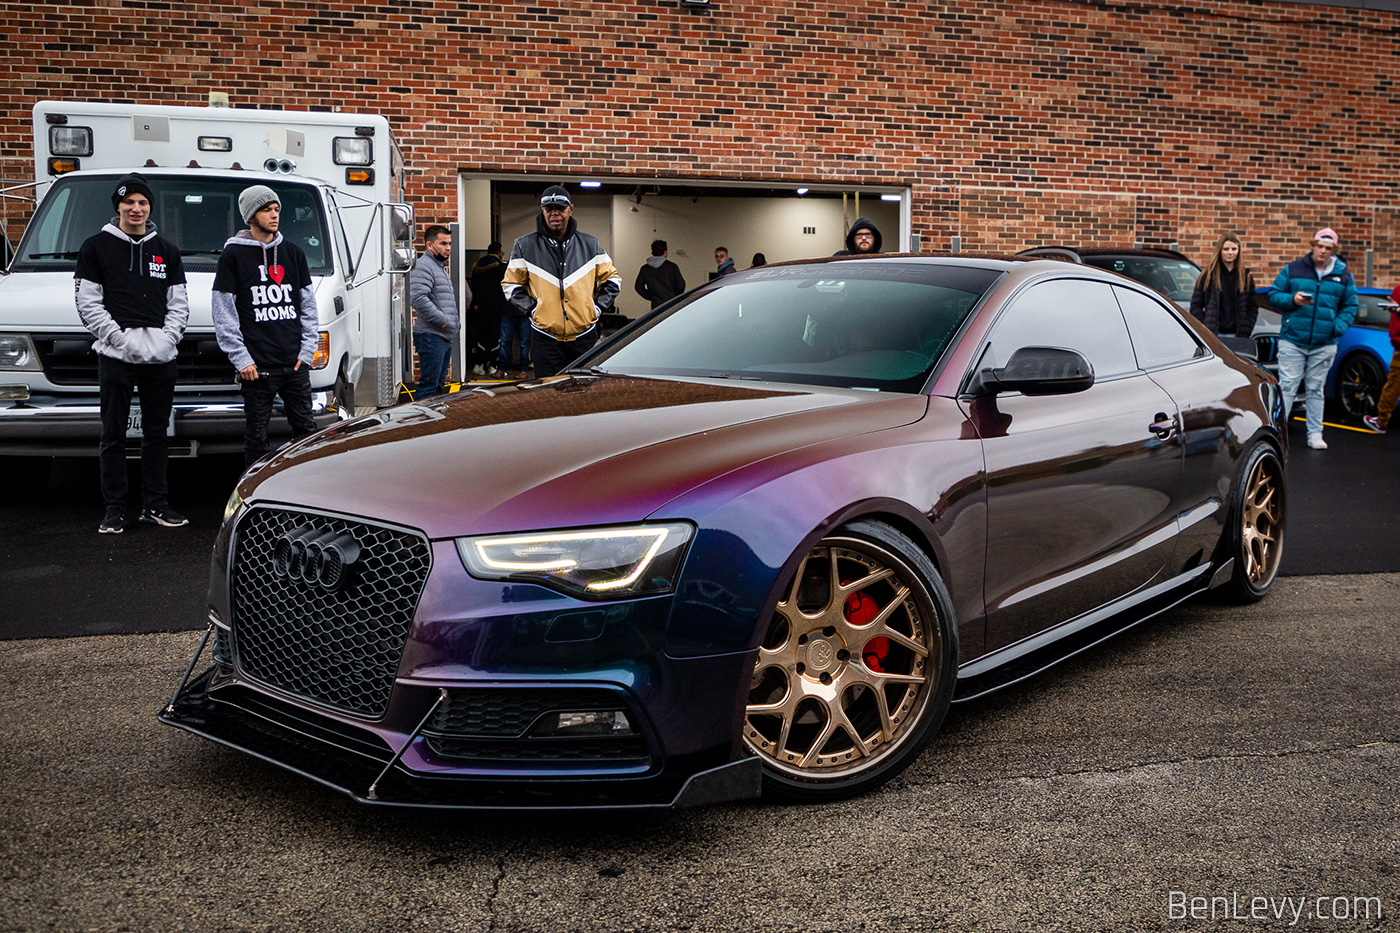 Bagged Purple Audi S5 at Chicago Auto Pros